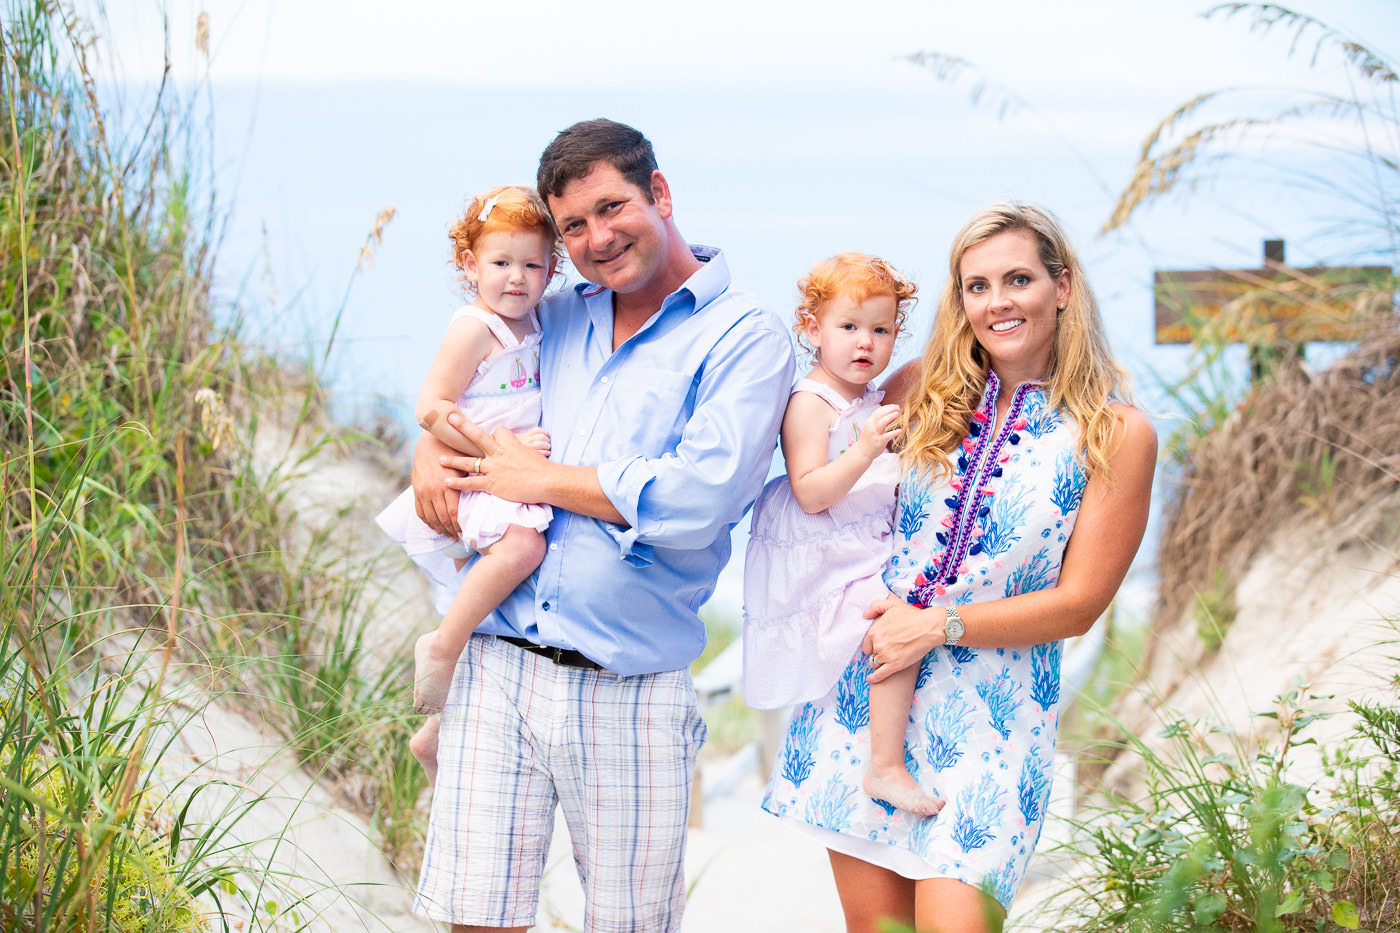 figure eight island - amily portrait photography - wilmington nc family portrait photpgraphers - image of family on beach - sunset family picture -  chris lang photography